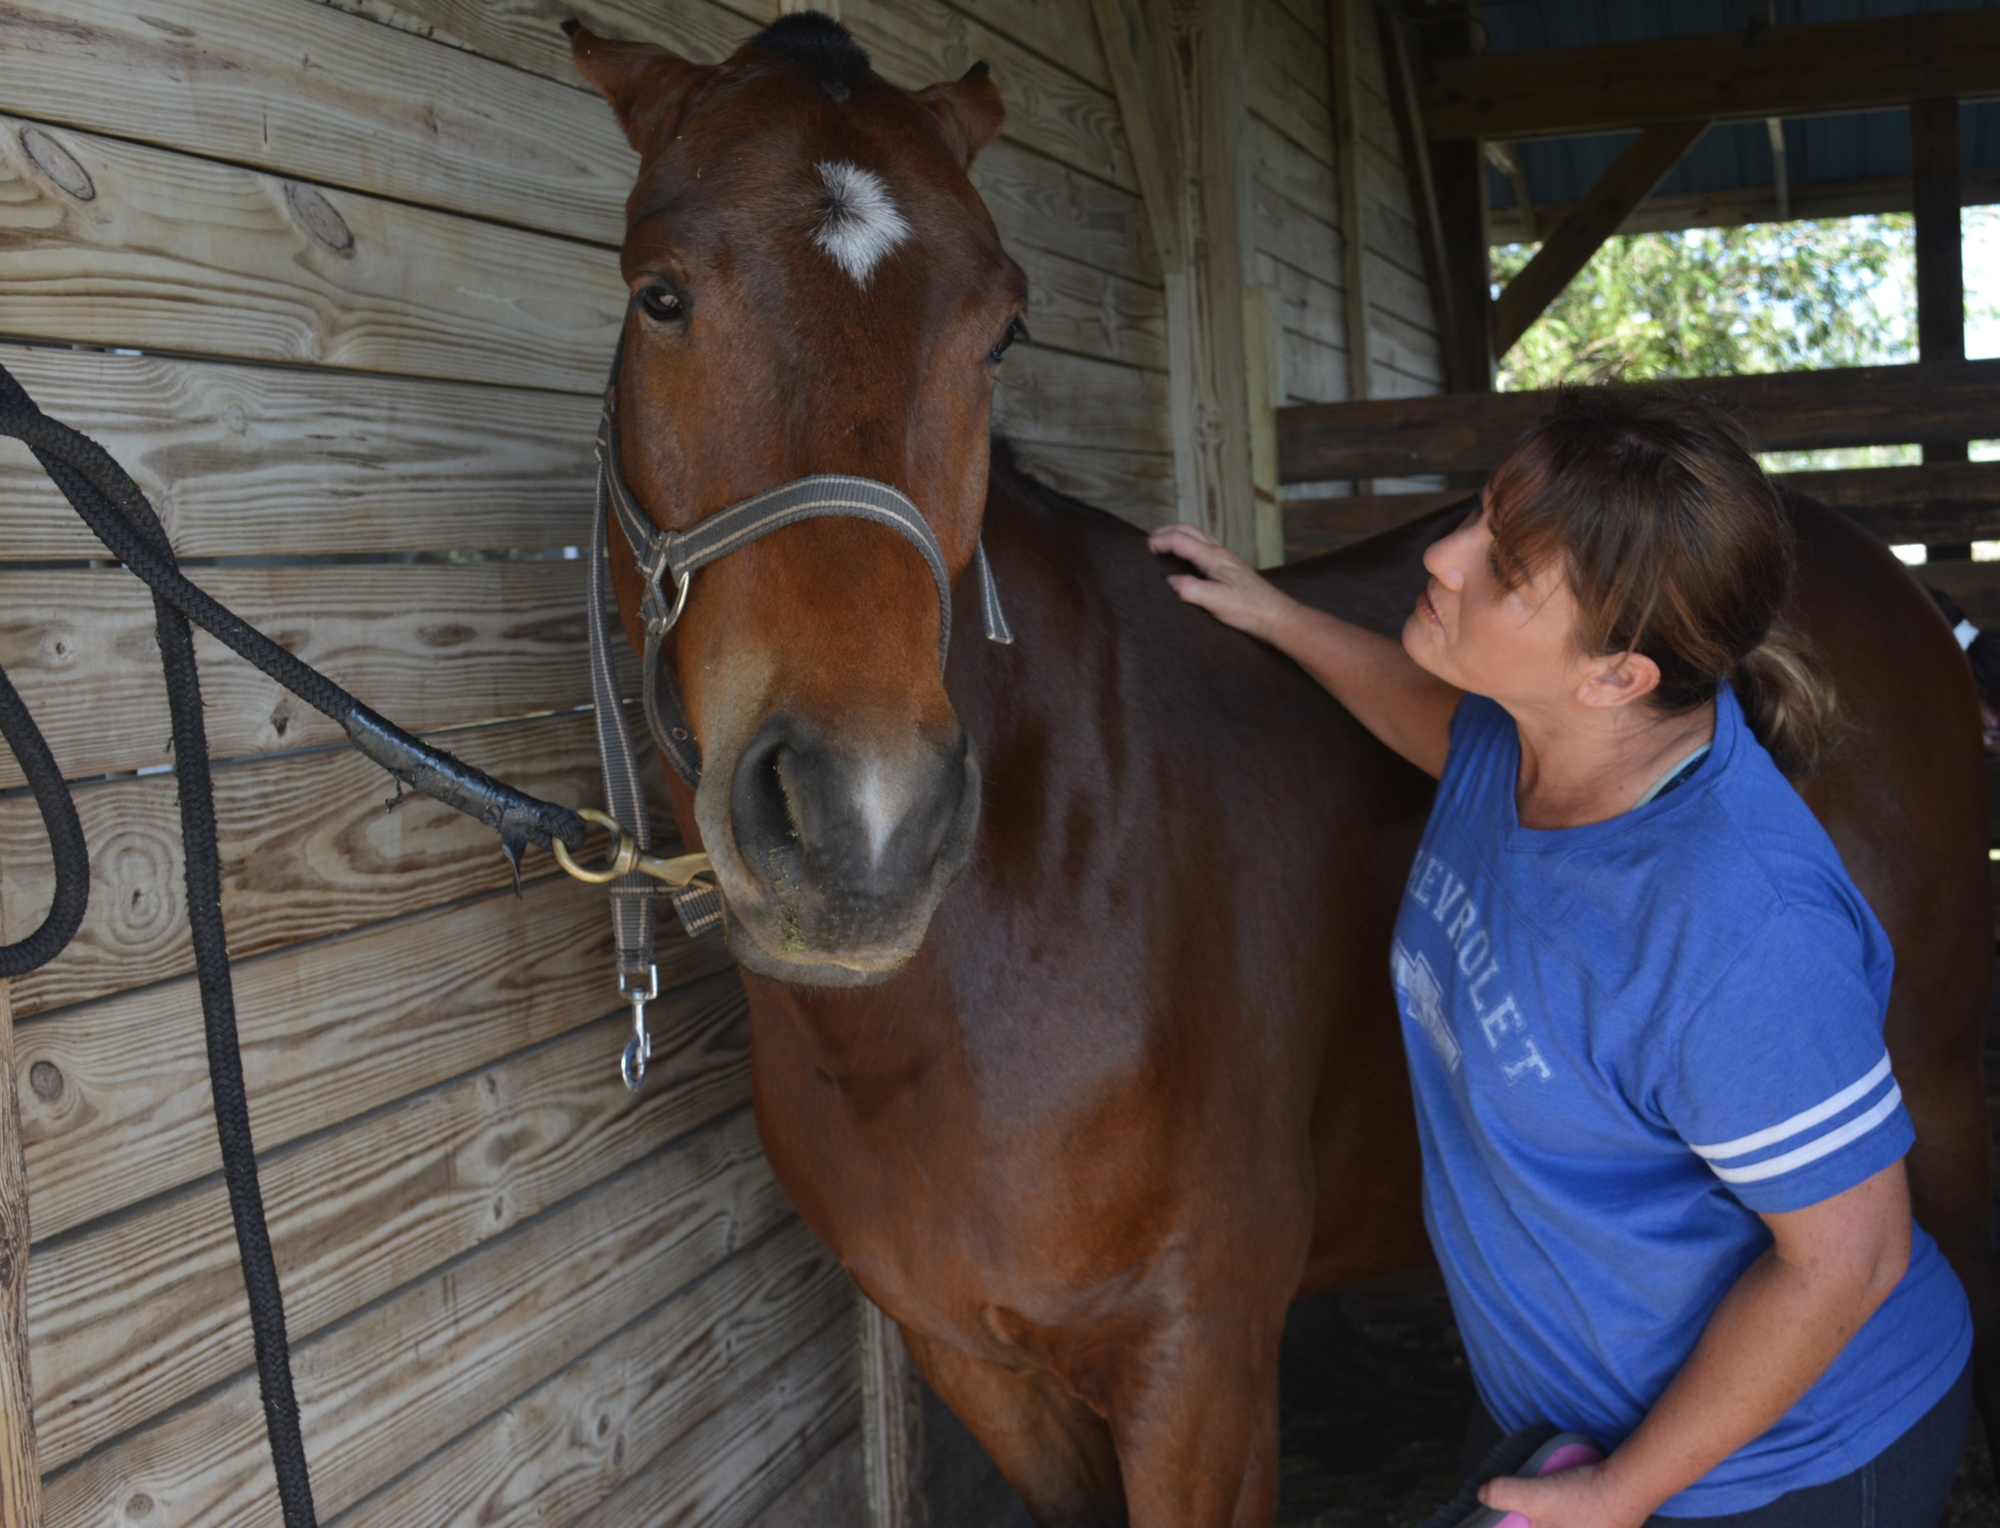 Those who love horses can check out polo by calling the Sarasota Polo Club for information about lessons and clubs. Jaymie Klauber said the social aspect is most enjoyable.